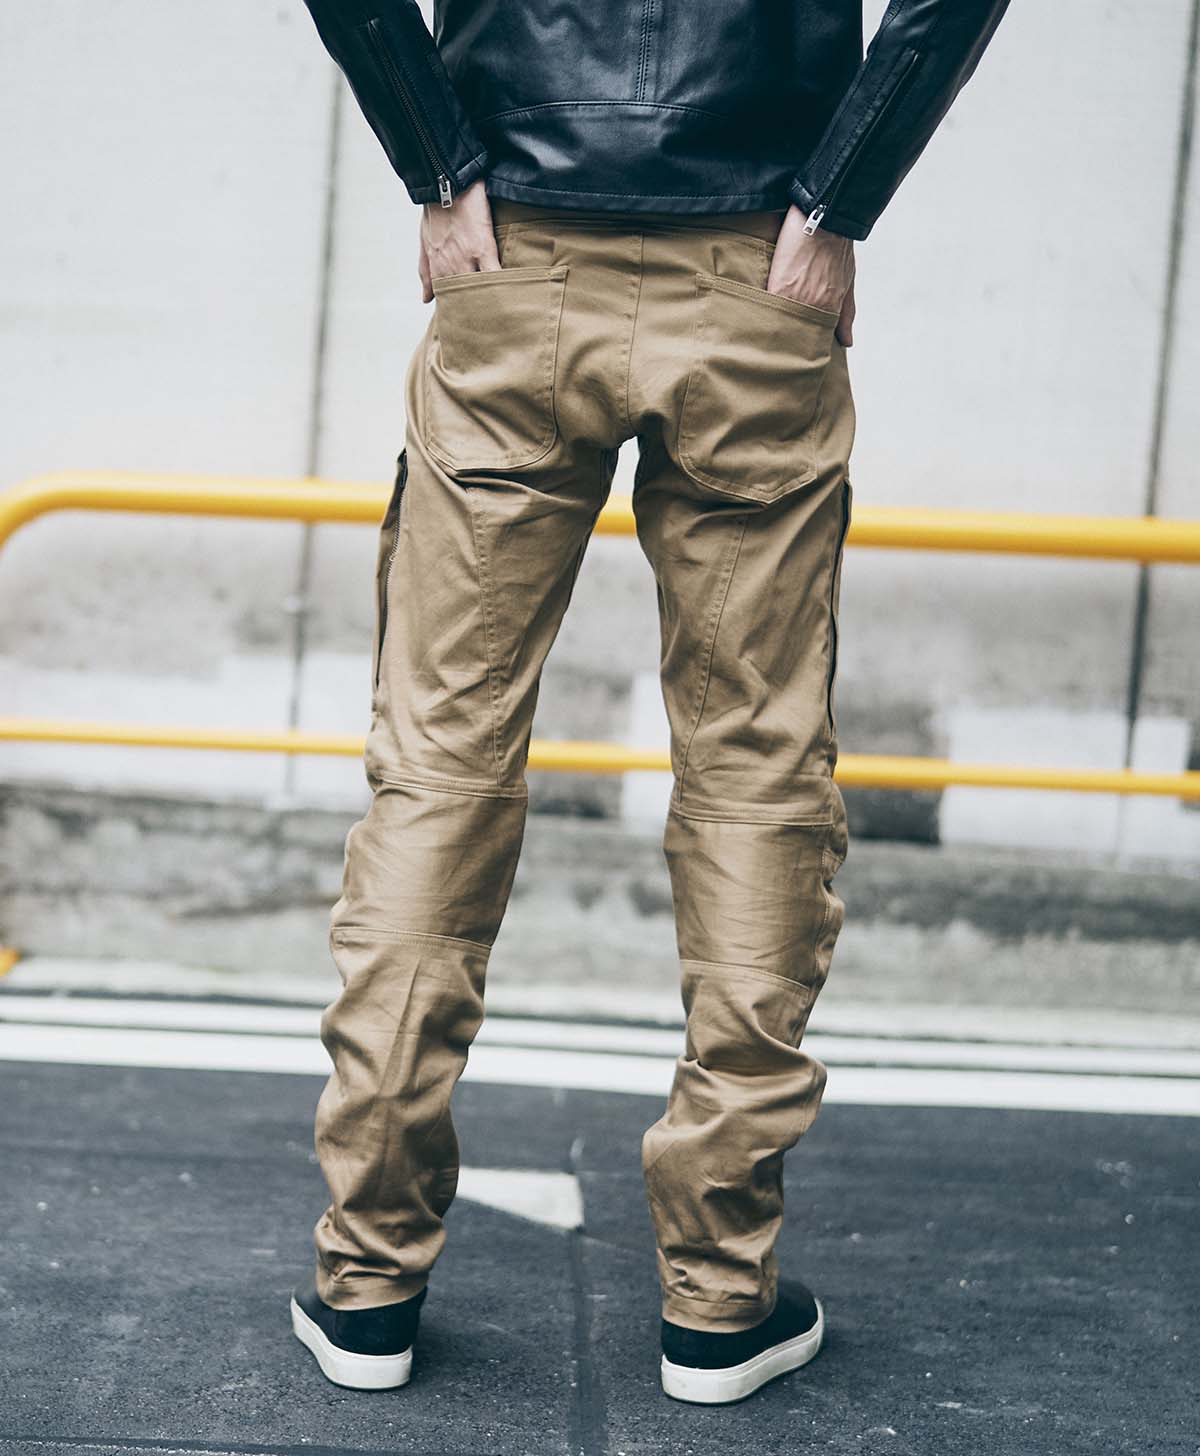 Aether Compass Pants - Brown - Motorcycle Pants